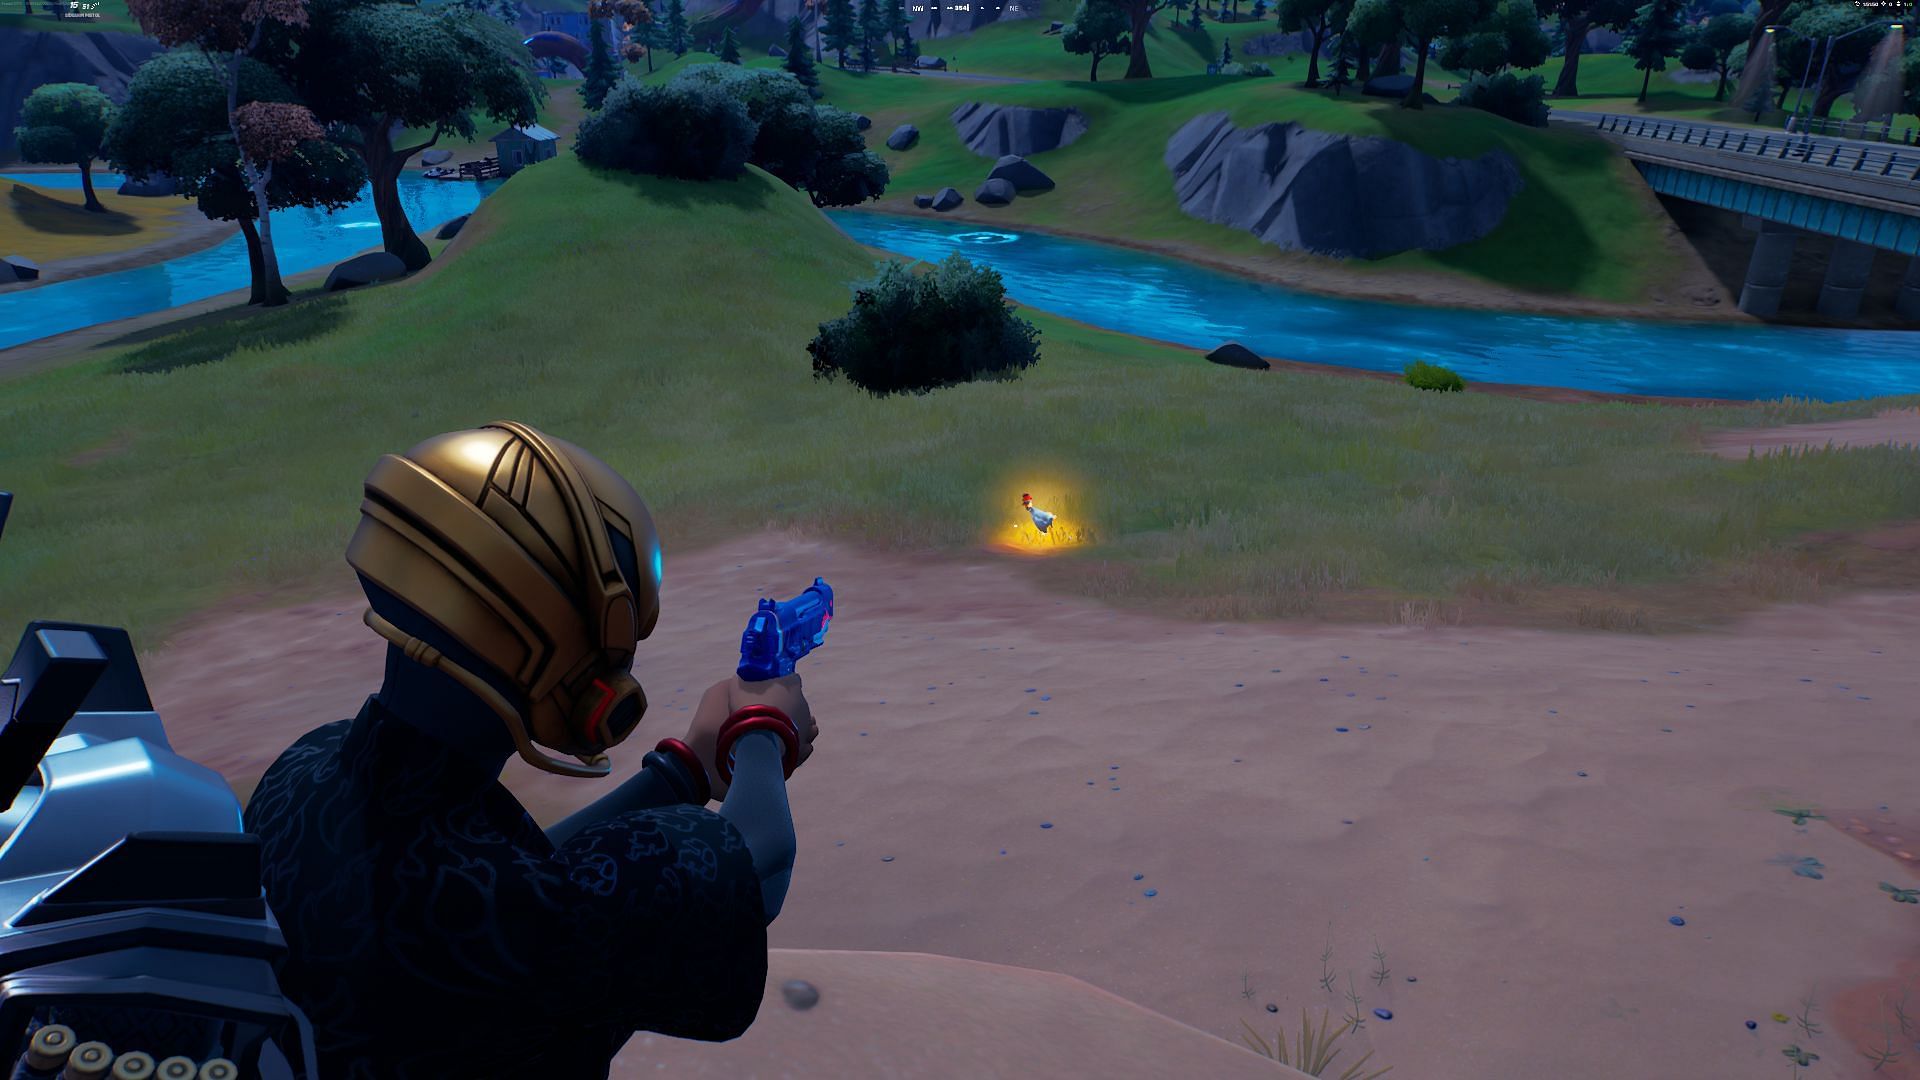 Glowing loot chicken are hard to come by in Fortnite (Image via Epic Games/Fortnite)